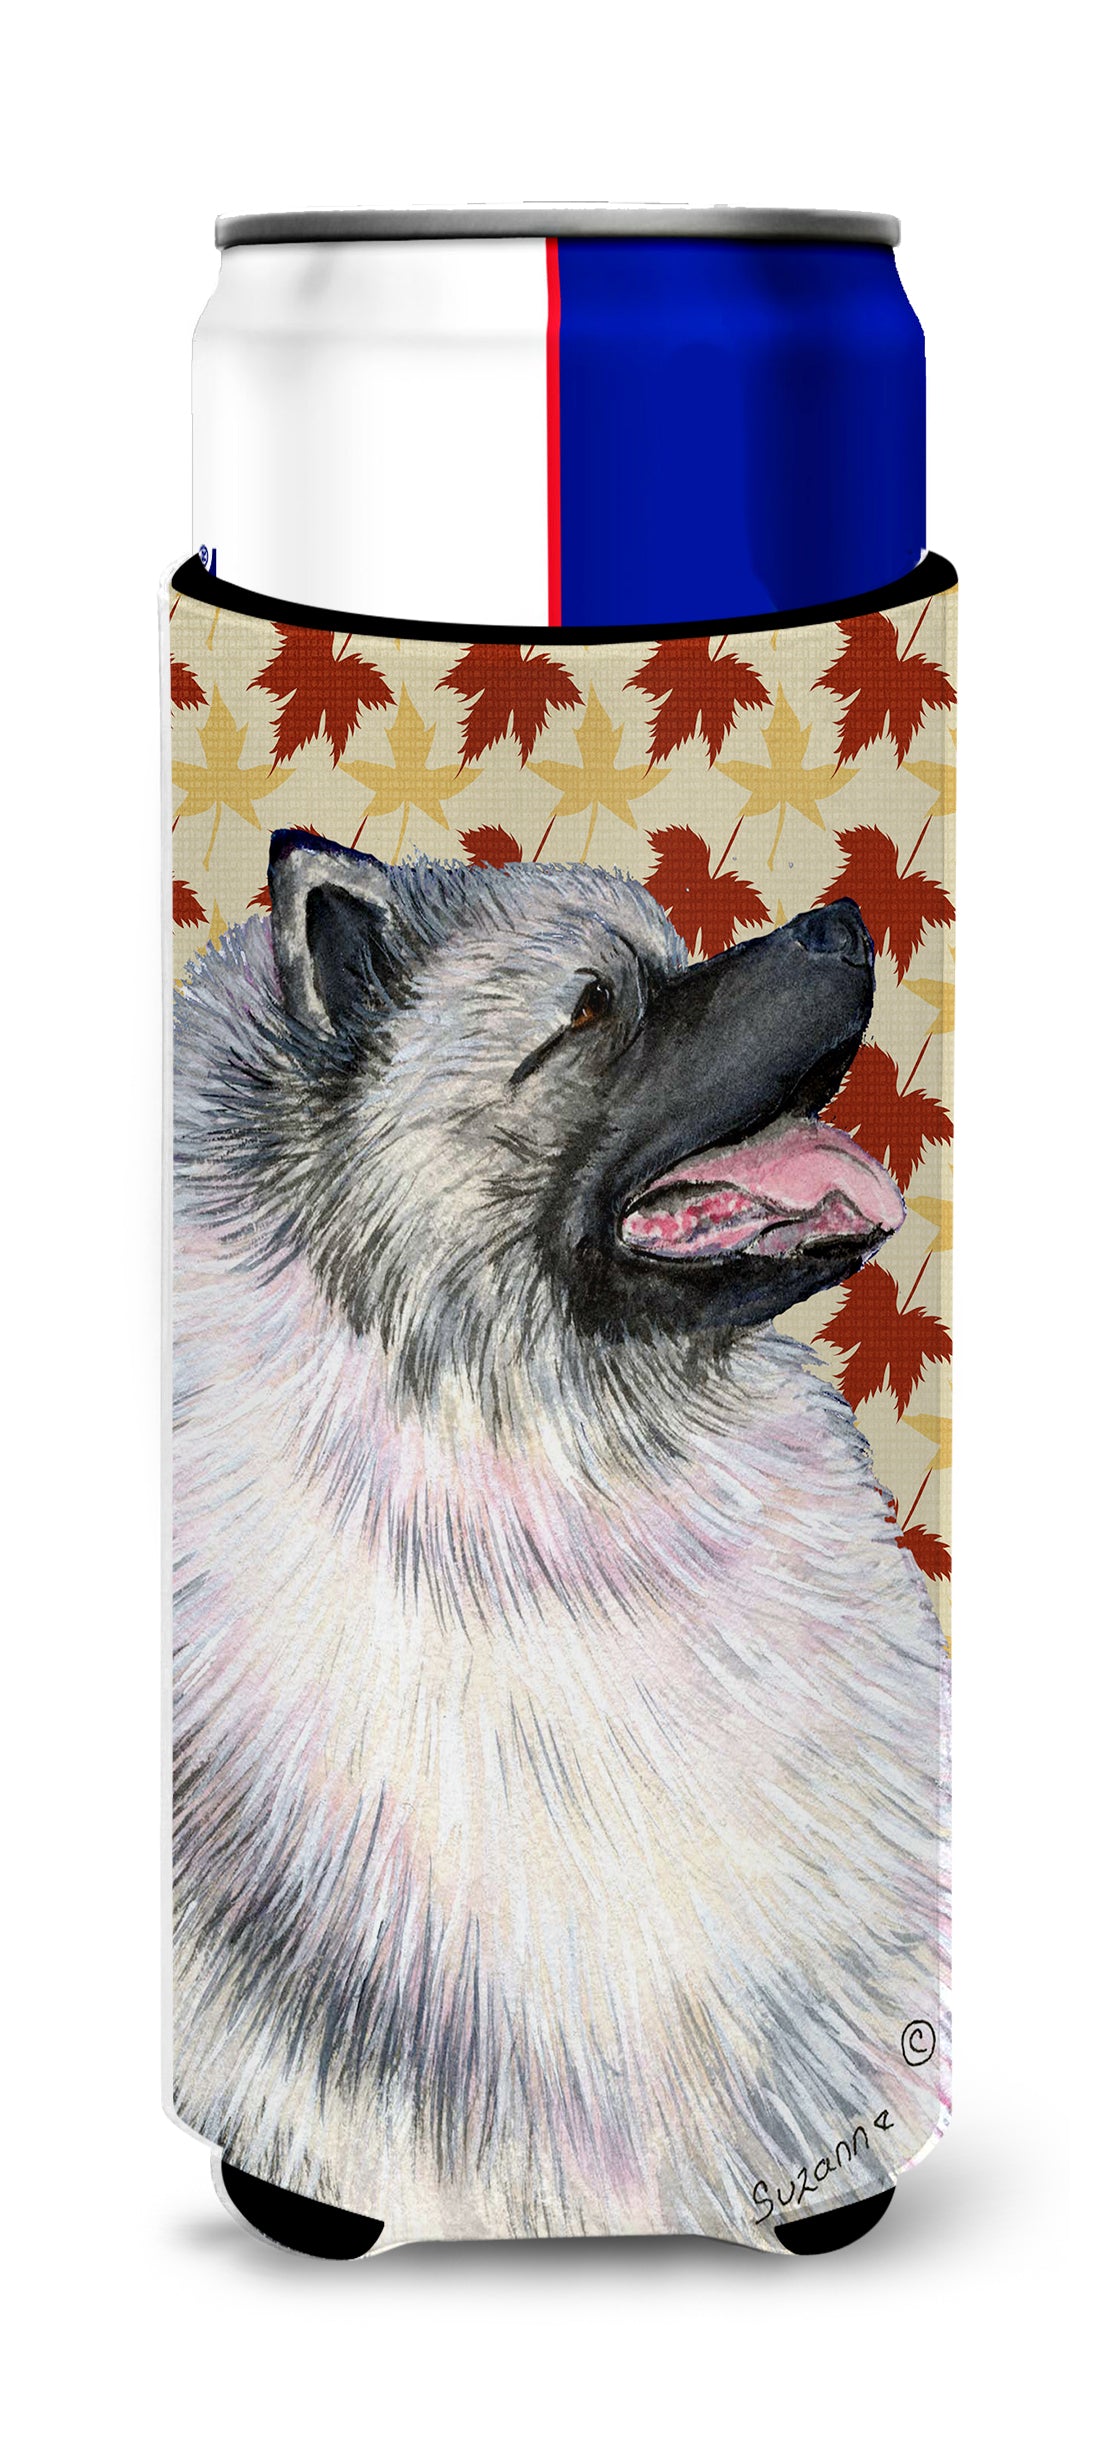 Keeshond Fall Leaves Portrait Ultra Beverage Insulators for slim cans SS4368MUK.